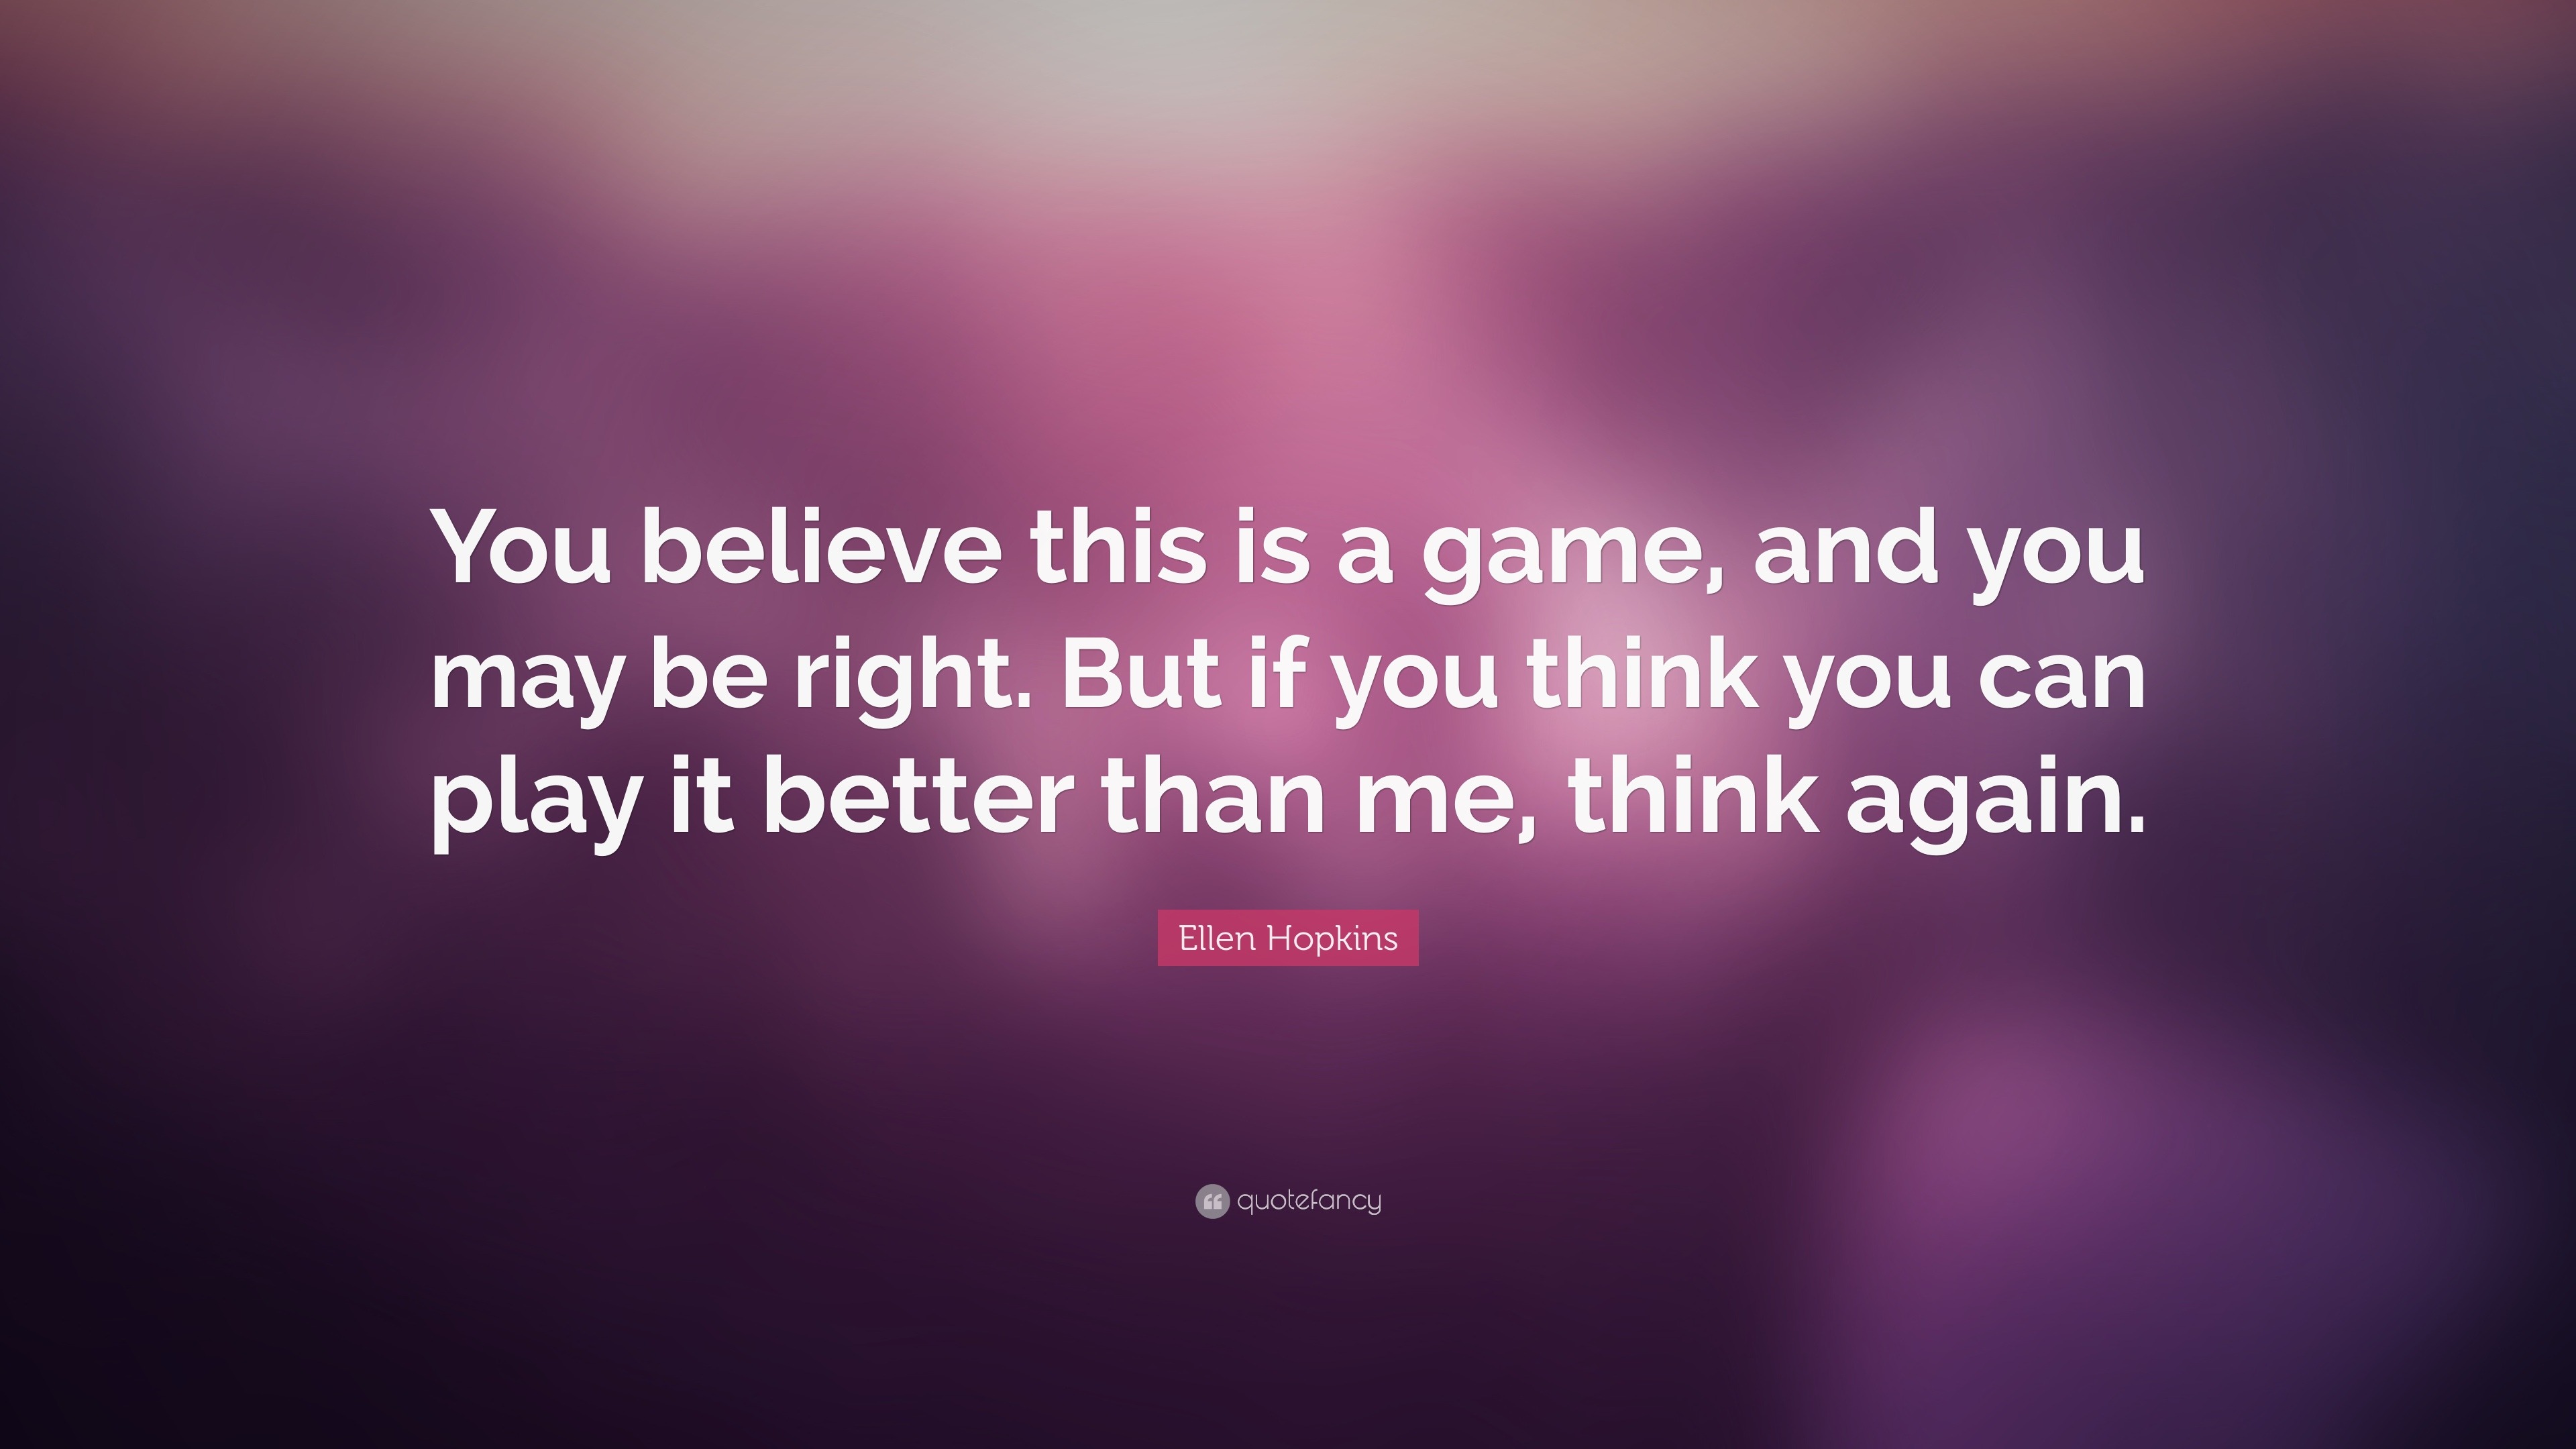 Ellen Hopkins Quote: “You believe this is a game, and you may be right. But  if, you played for me 